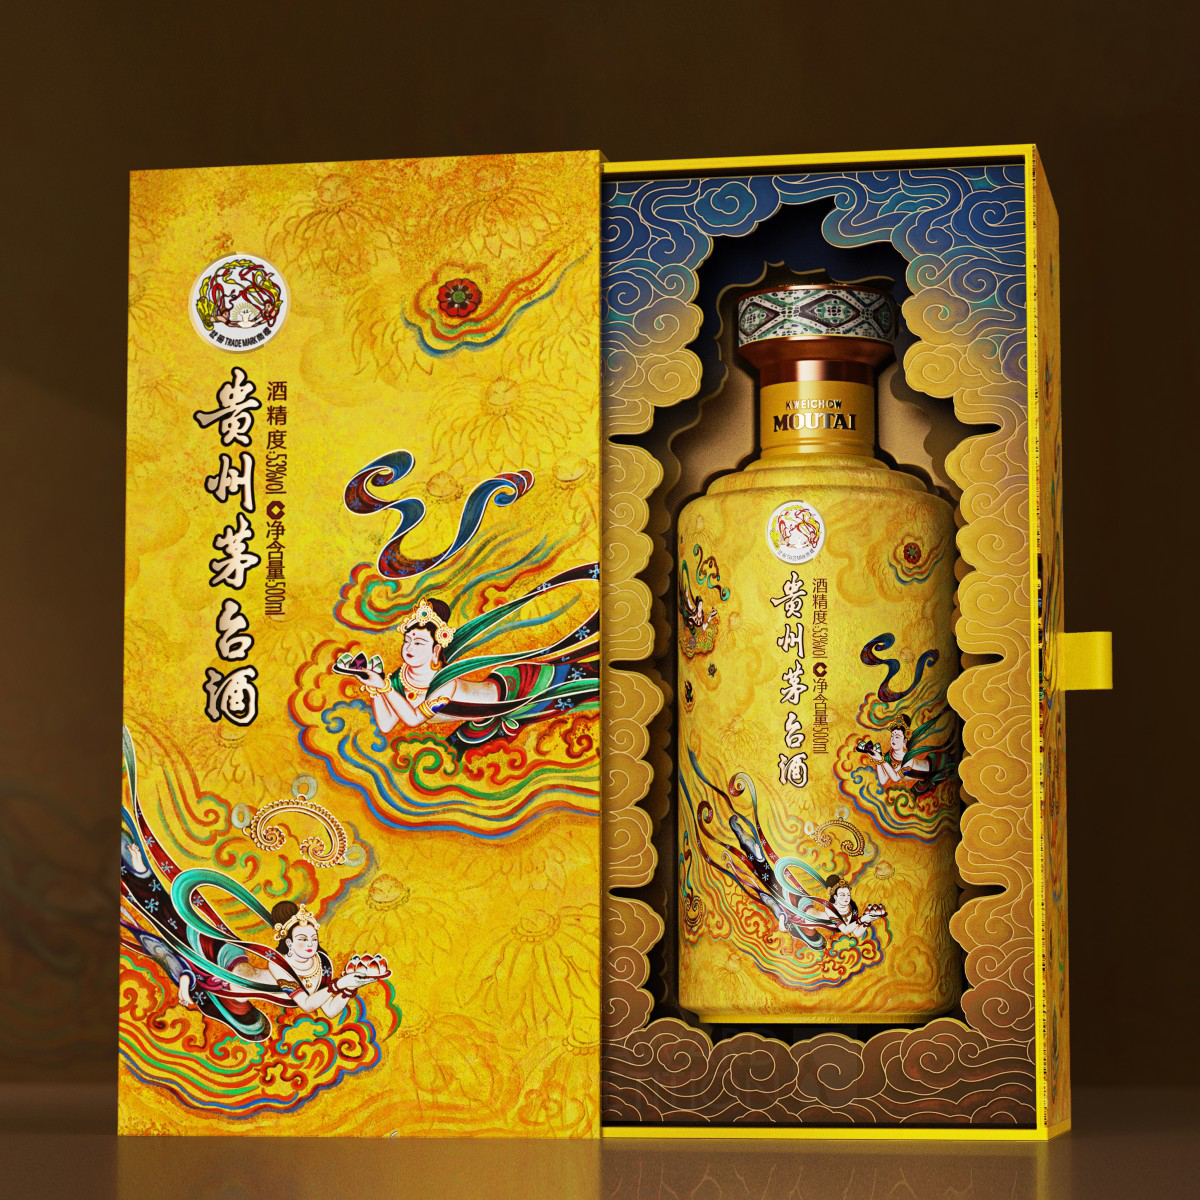 Ying Song Brand Design Co., Ltd wins Silver at the prestigious A' Packaging Design Award with Kweichow Moutai Sanhua Flying Apsaras Baijiu Packaging.